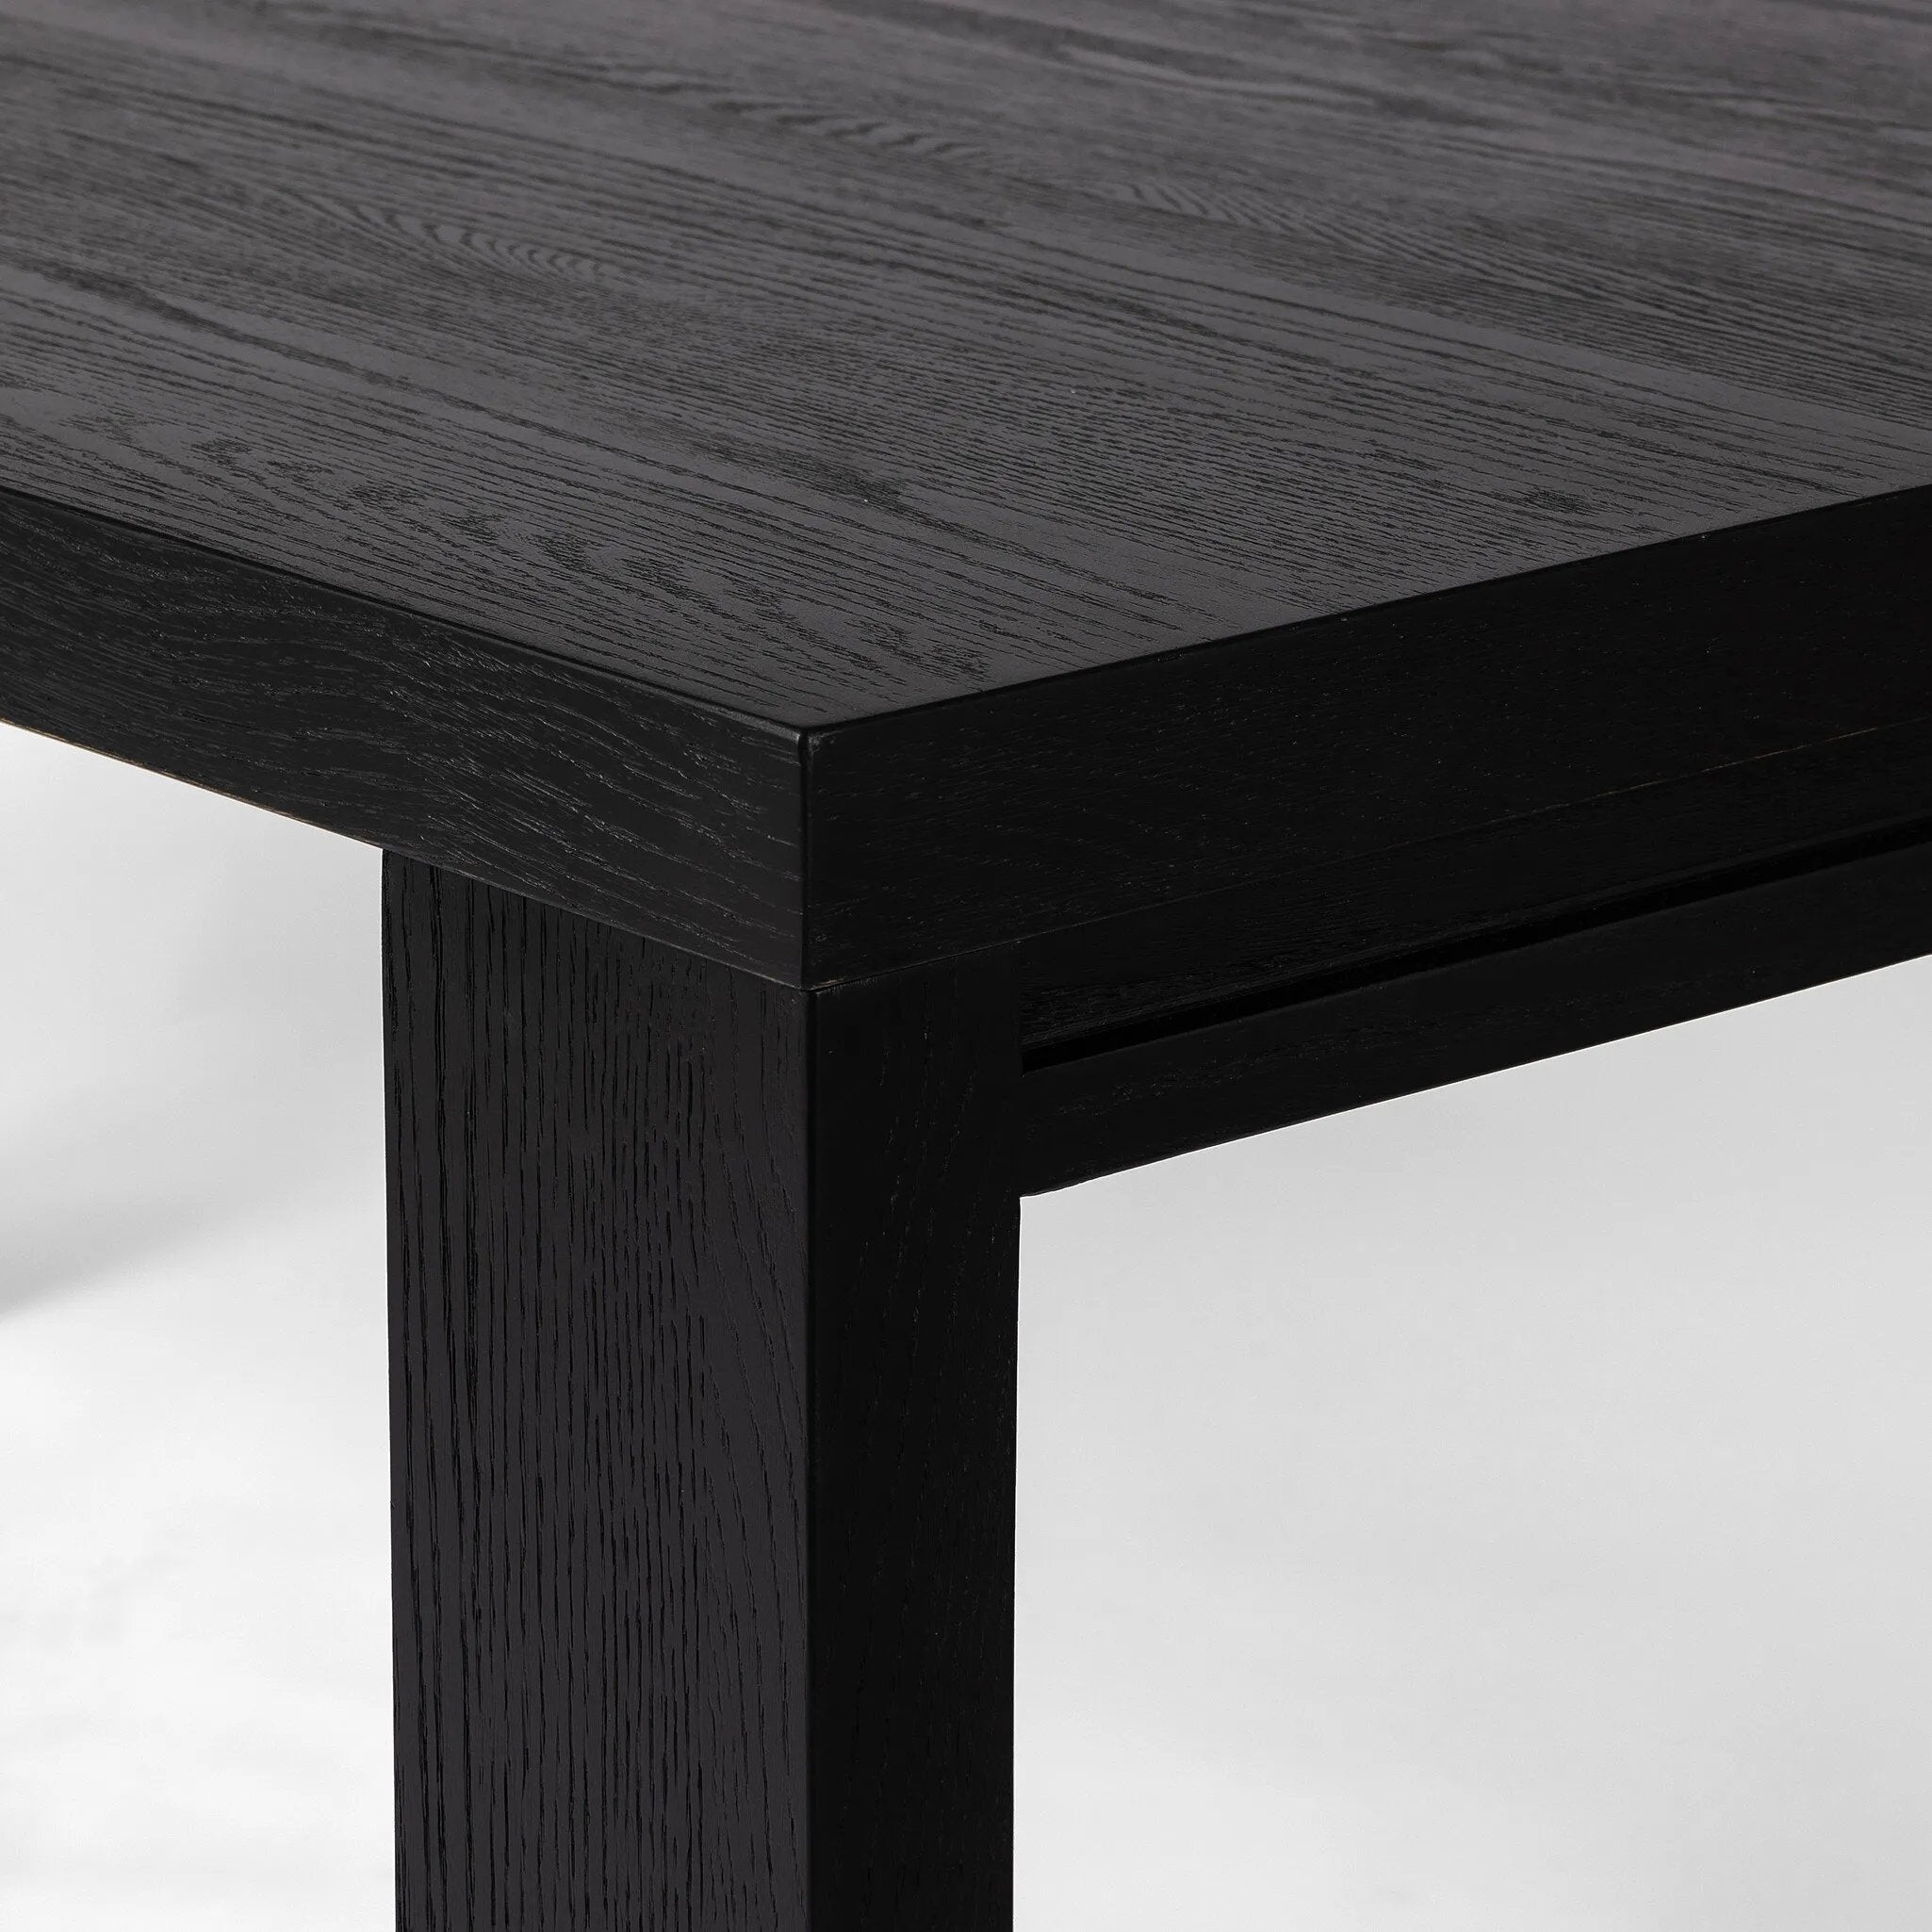 Angled legs place a modern twist on the timeless Parsons table. Versatile black-finished oak moves between styles and color palettes with ease.Collection: Irondal Amethyst Home provides interior design, new home construction design consulting, vintage area rugs, and lighting in the Newport Beach metro area.